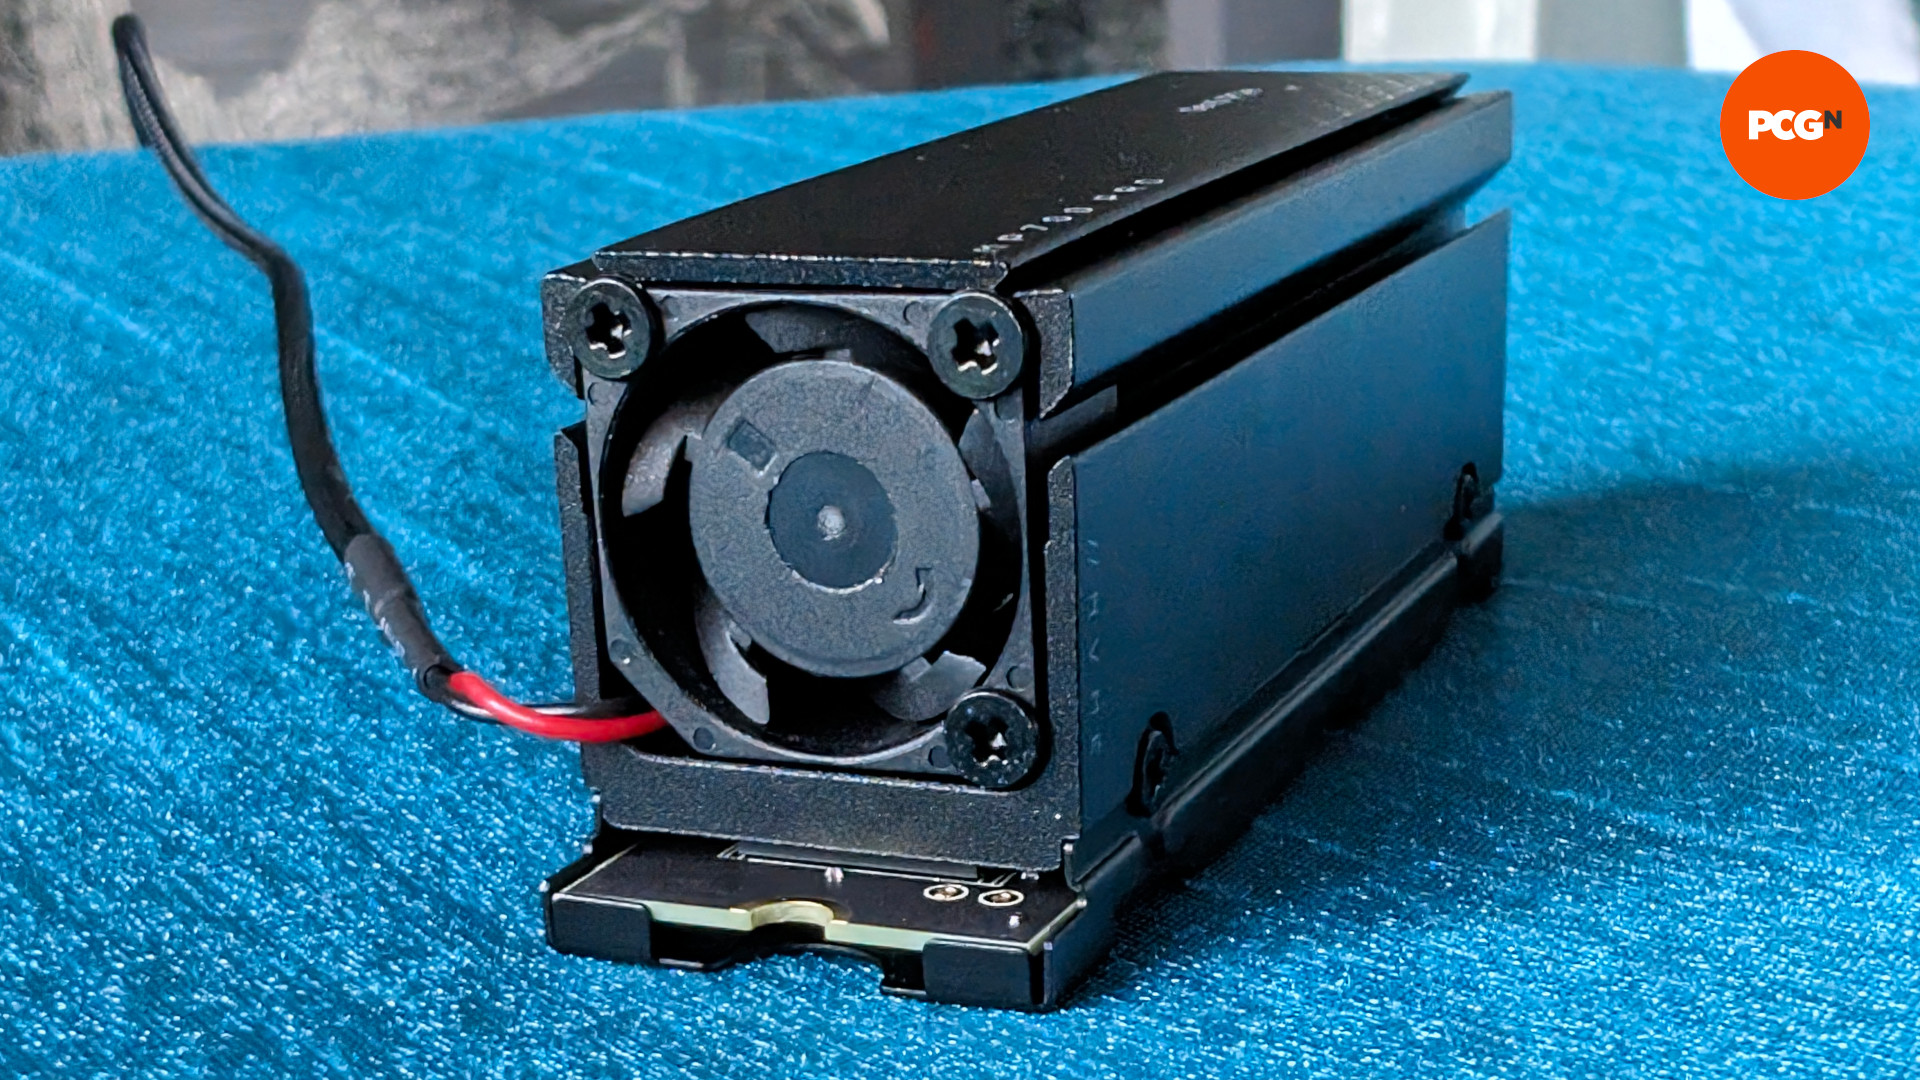 The Corsair MP700 Pro SSD, foucssing on its built-in air cooling solution, against a blue background